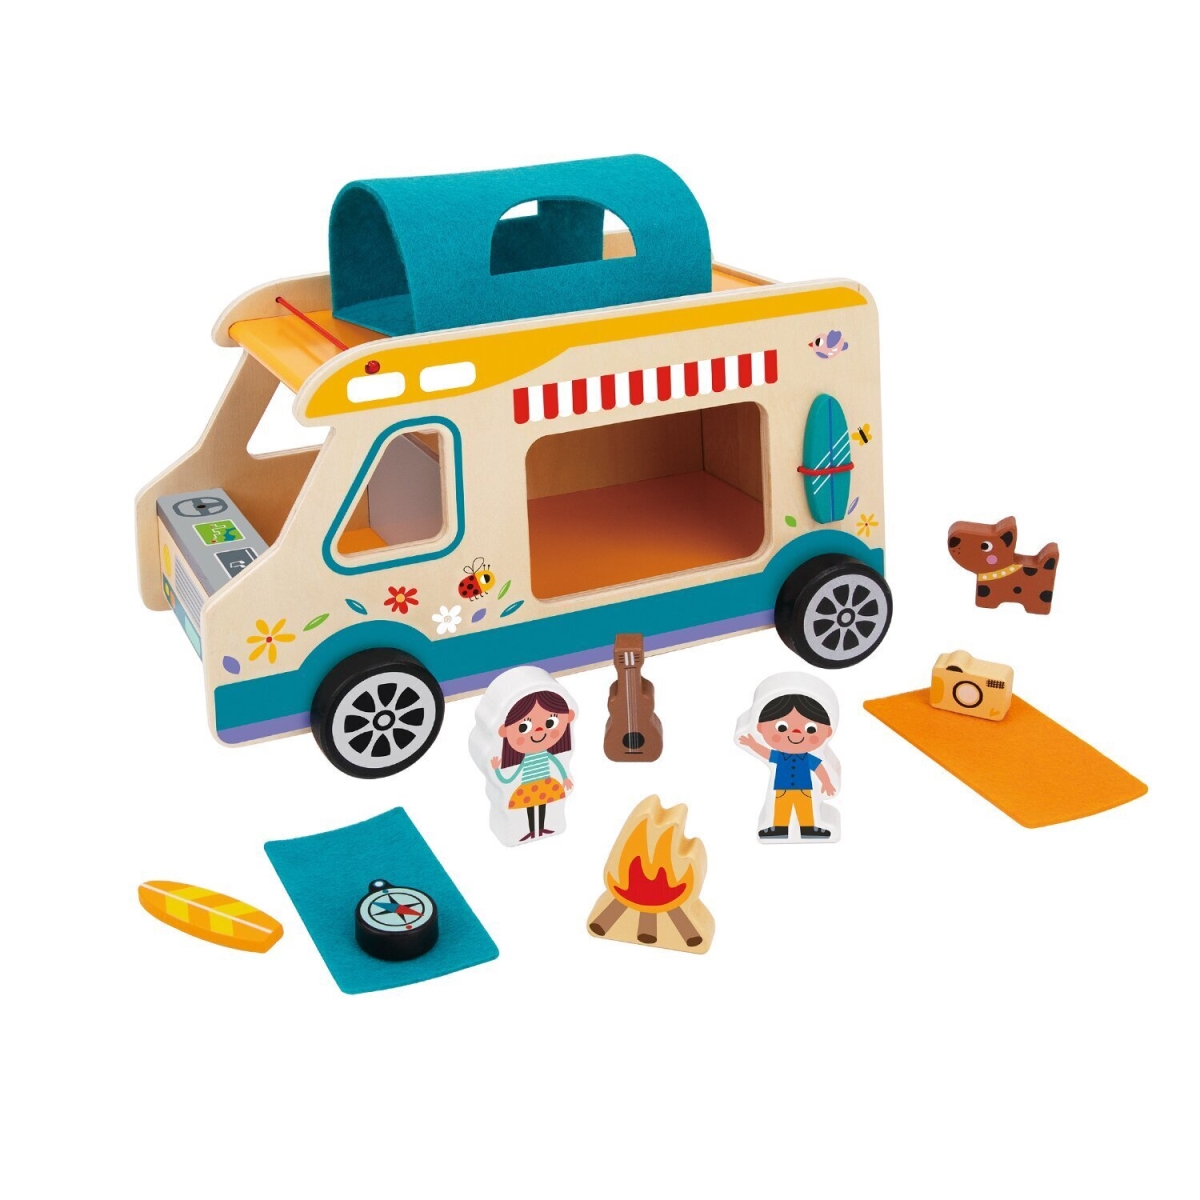 Picture of Tooky Toy 300286 30 x 17 x 23 cm Camping RV Play Set